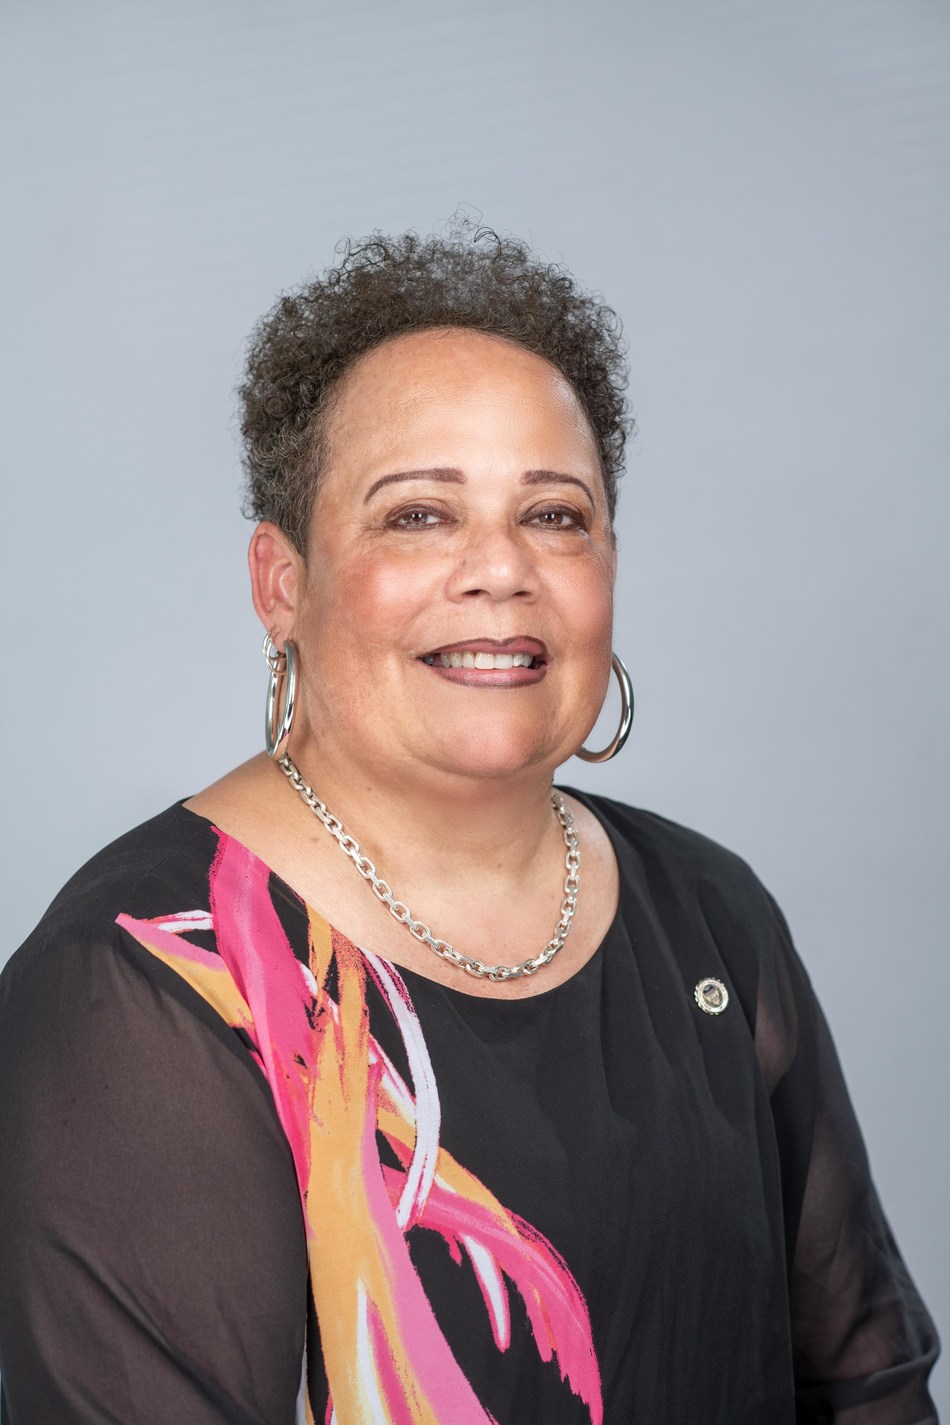 Howard University appoints Andrea D. Jackson, DDS, as dean of the College of Dentistry.